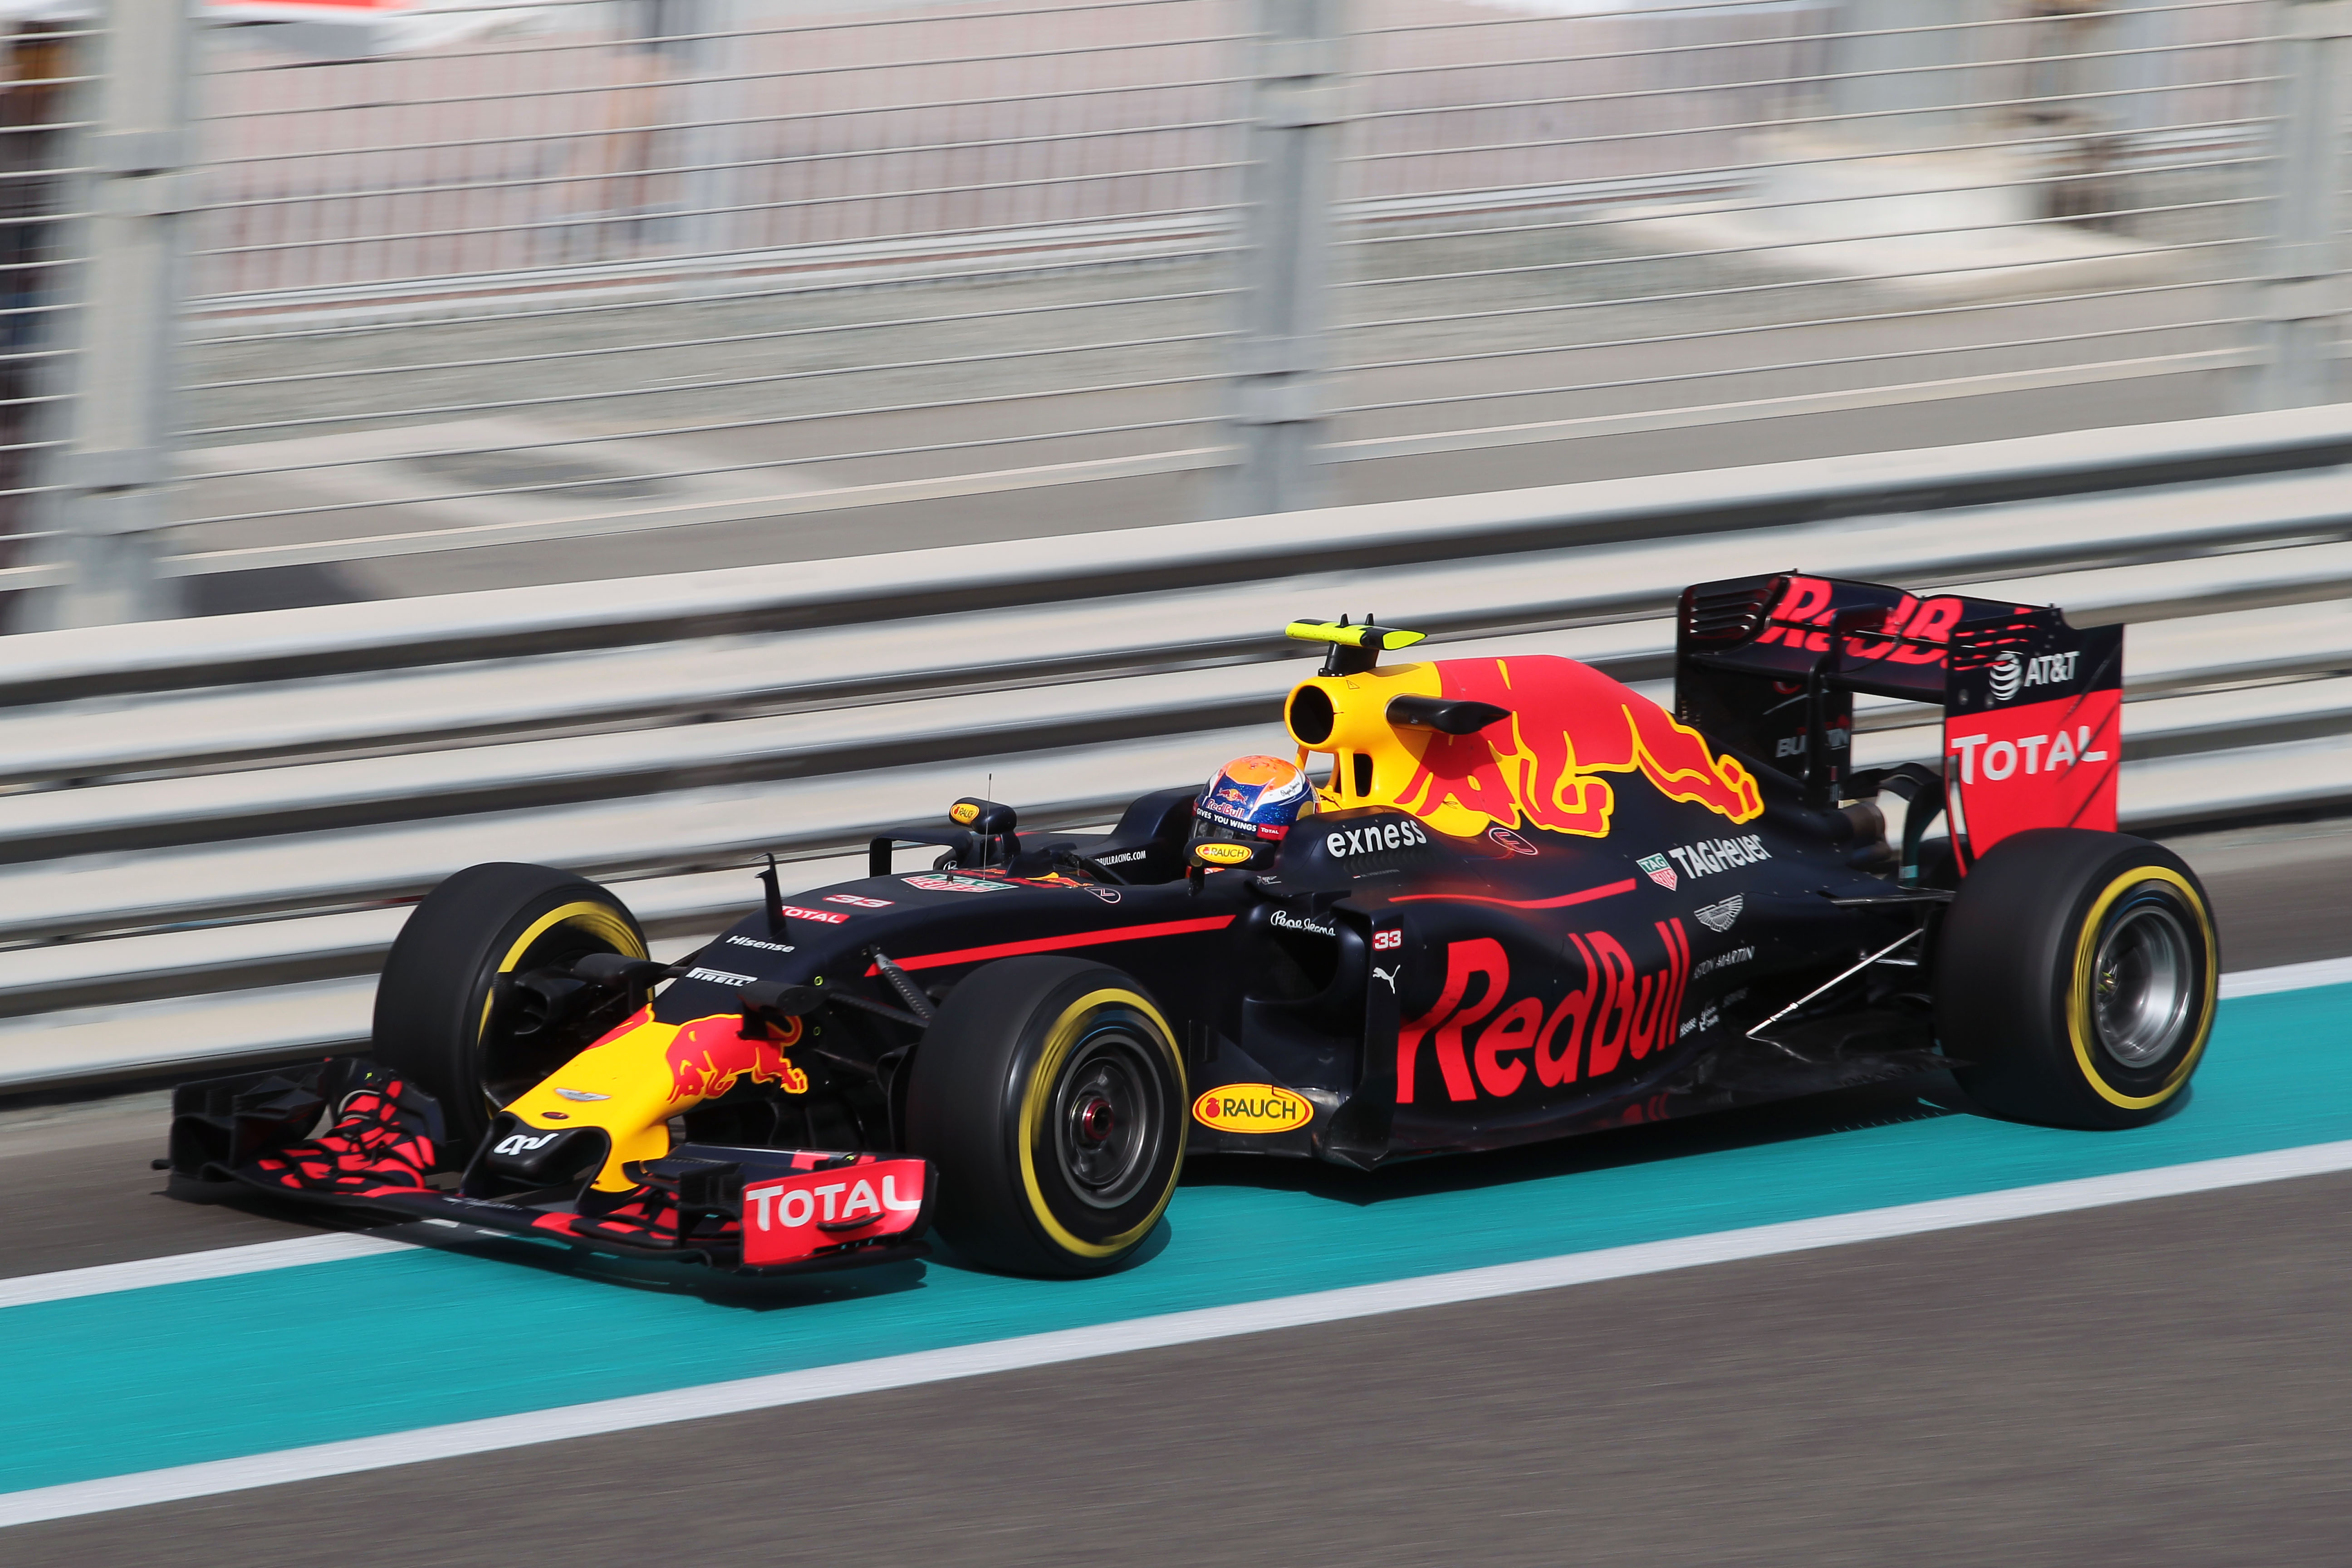 Red Bull Racing Rb12 Wallpapers